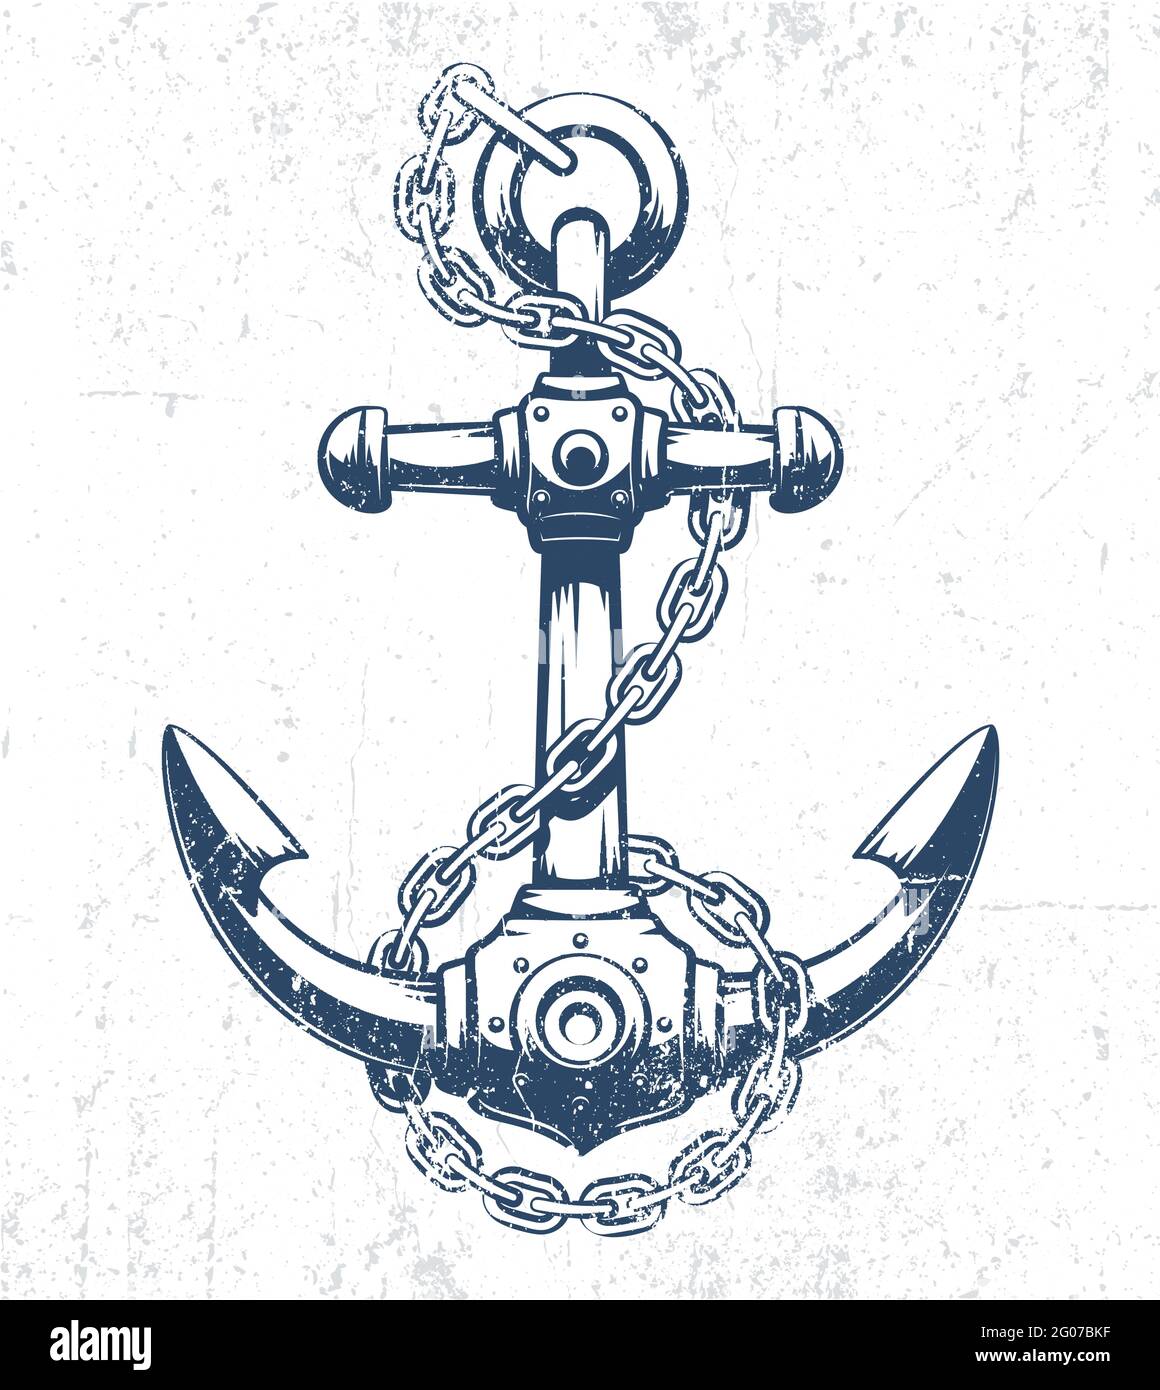 Vintage anchor with grunge texture Stock Vector